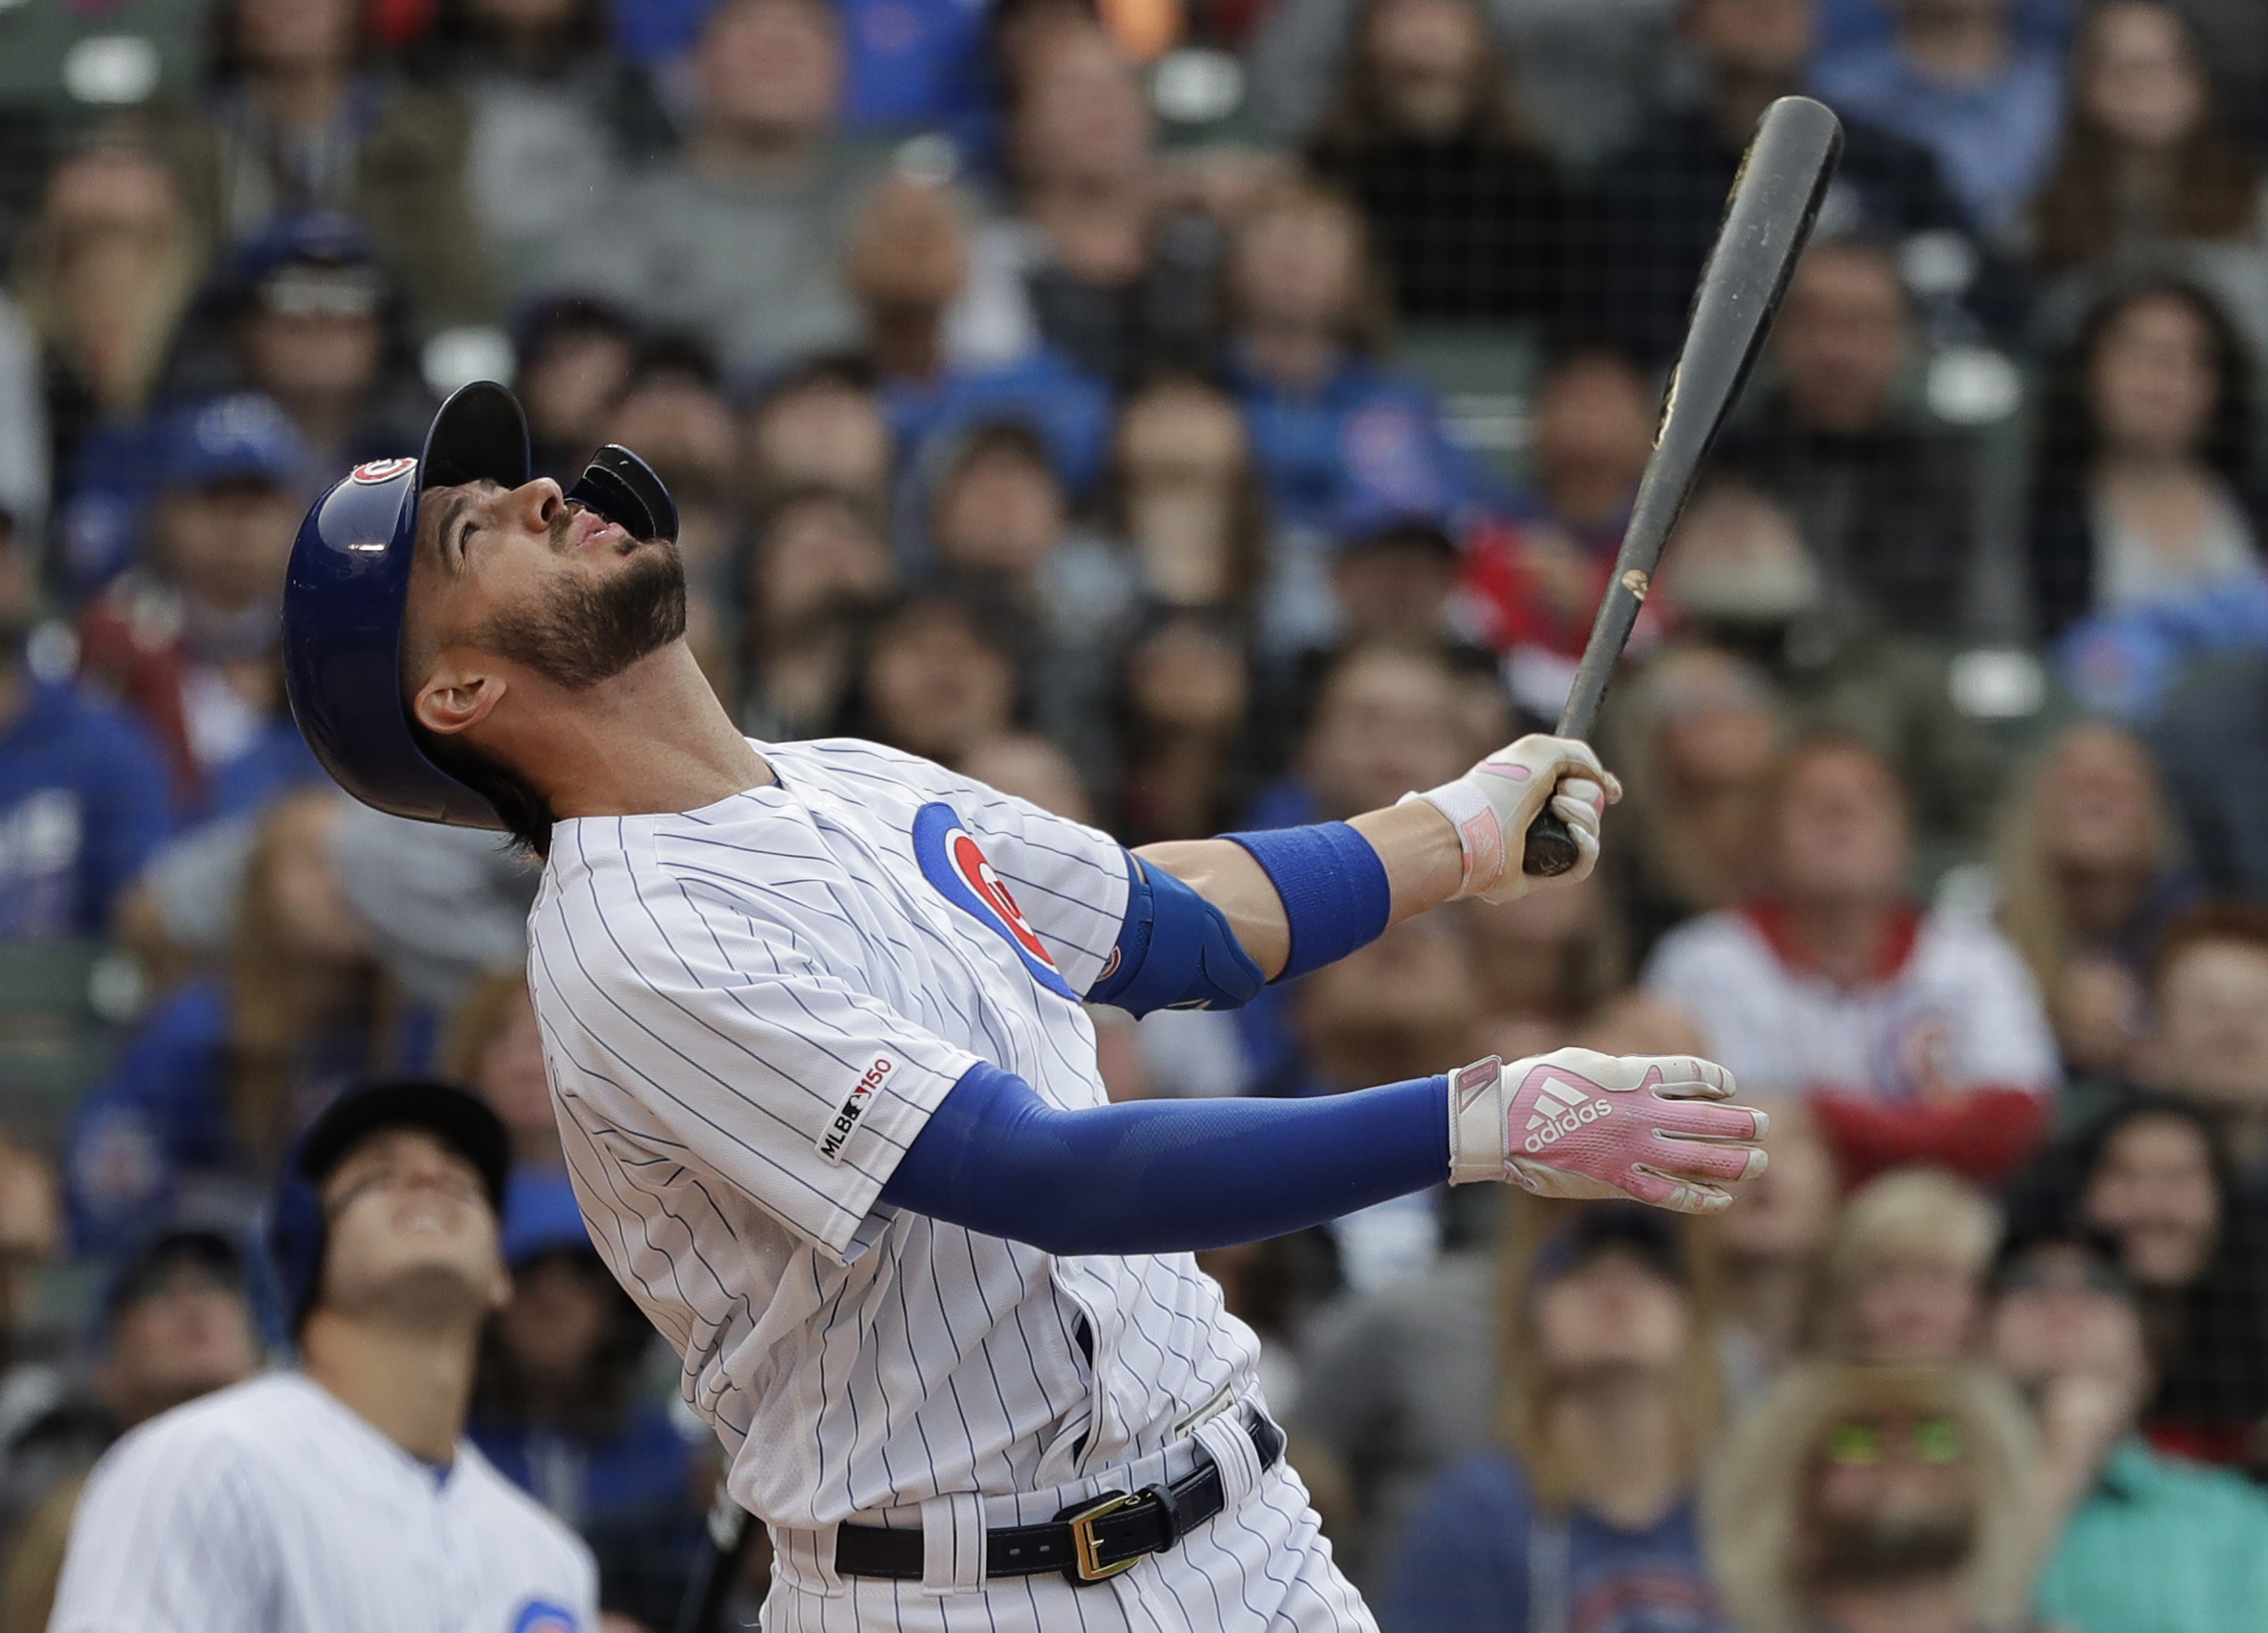 Cubs slugger Kris Bryant exits game after outfield collision